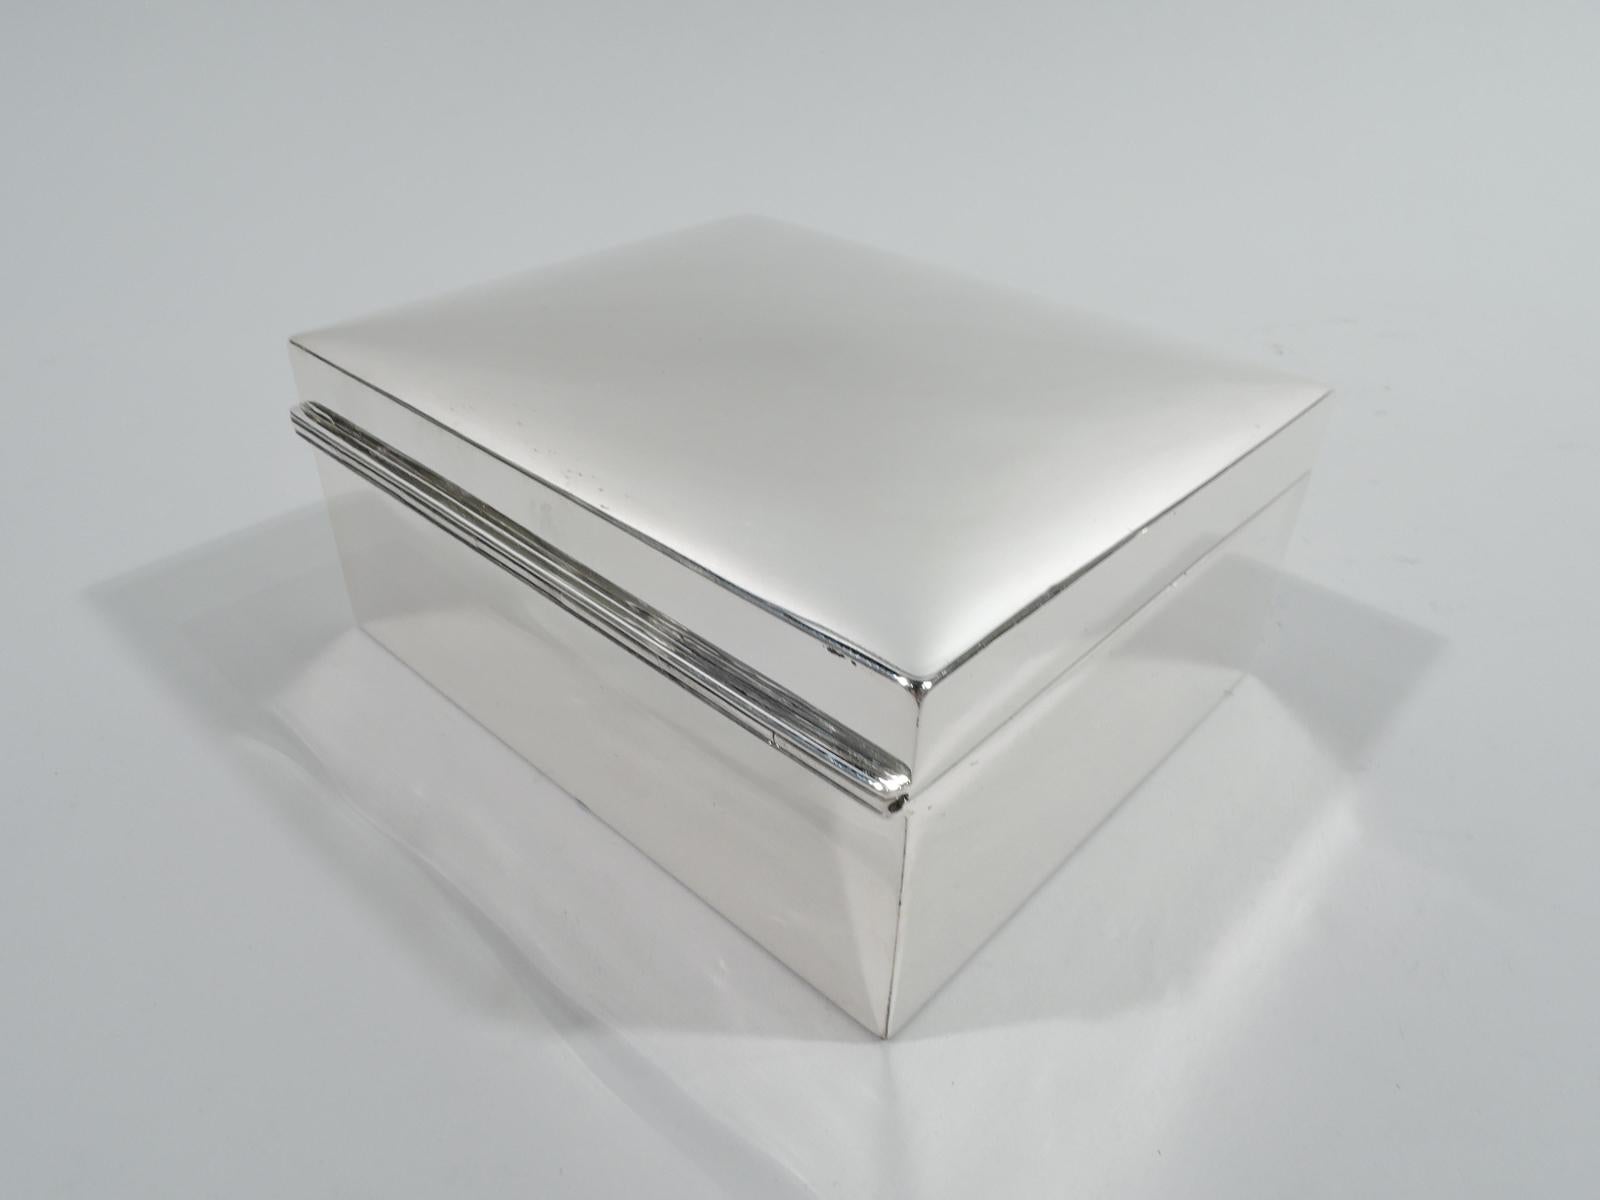 Small sterling silver jewelry box, ca 1910. Retailed by Tiffany & Co. in New York. Rectangular with straight sides. Cover hinged and raised with gently curved top and tapering tab. Fitted velvet lining with detachable tray. With key. Marked “Tiffany